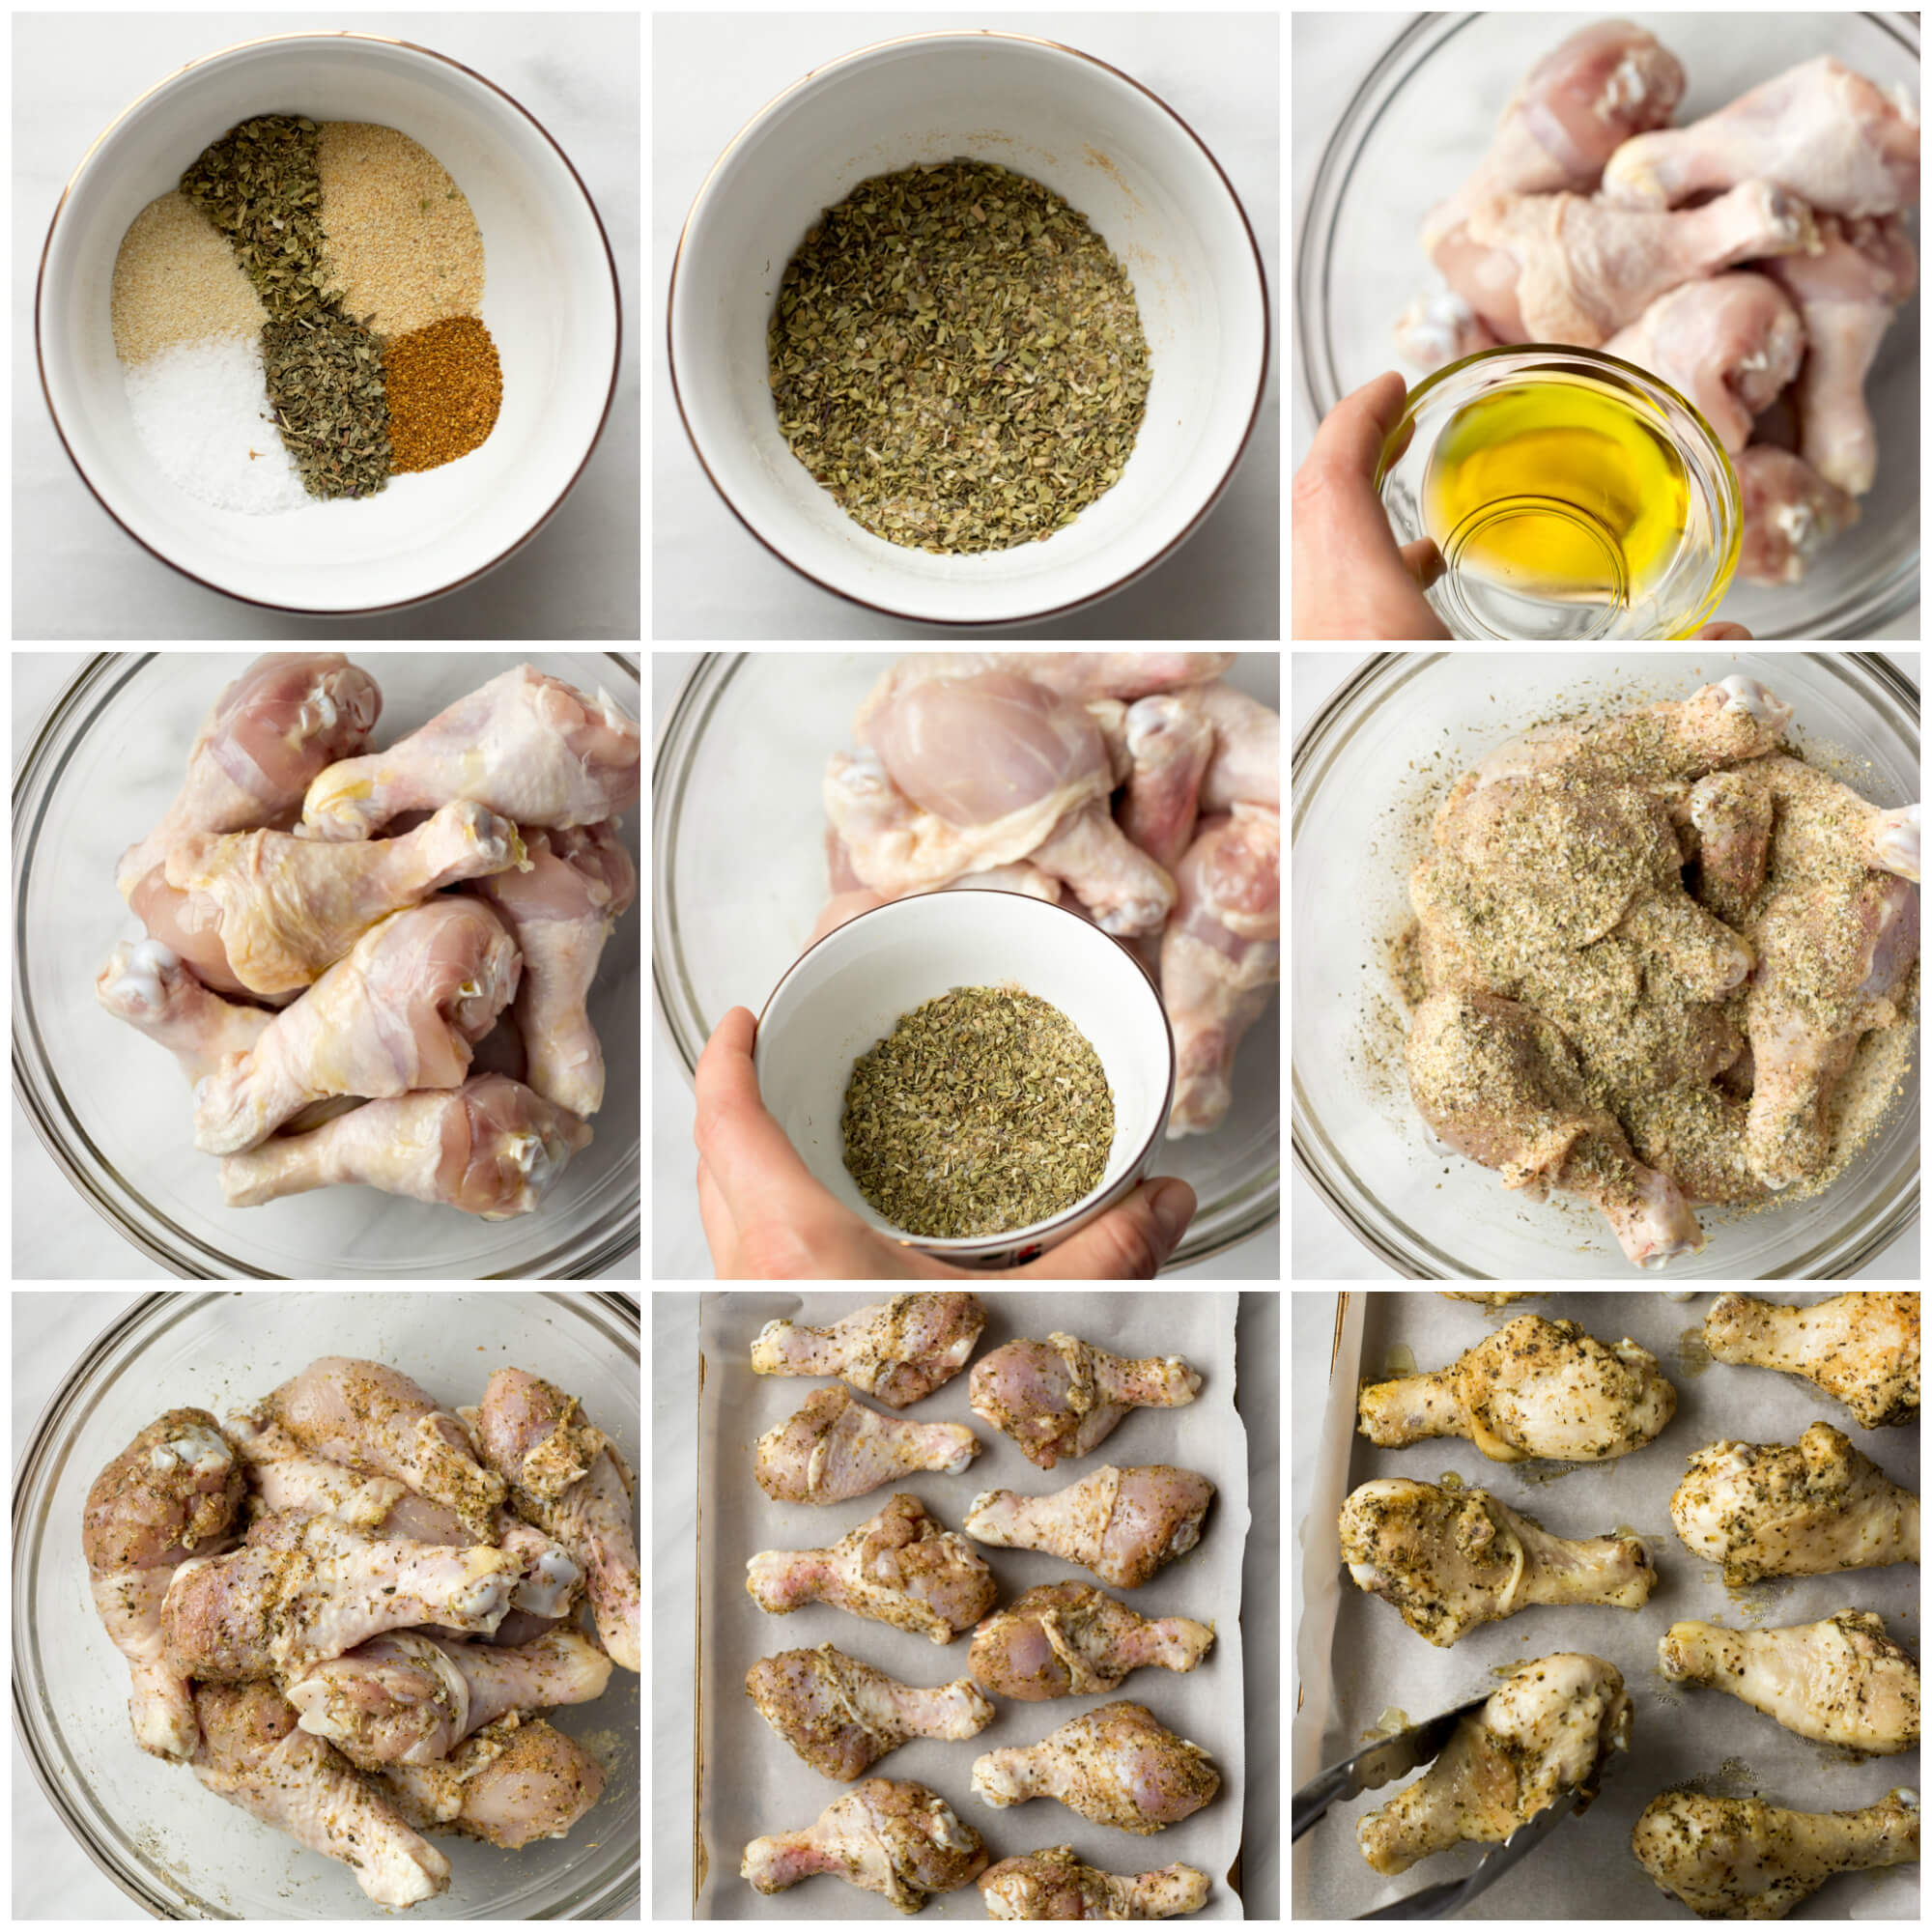 step by step instructions on how to make herb chicken drumsticks